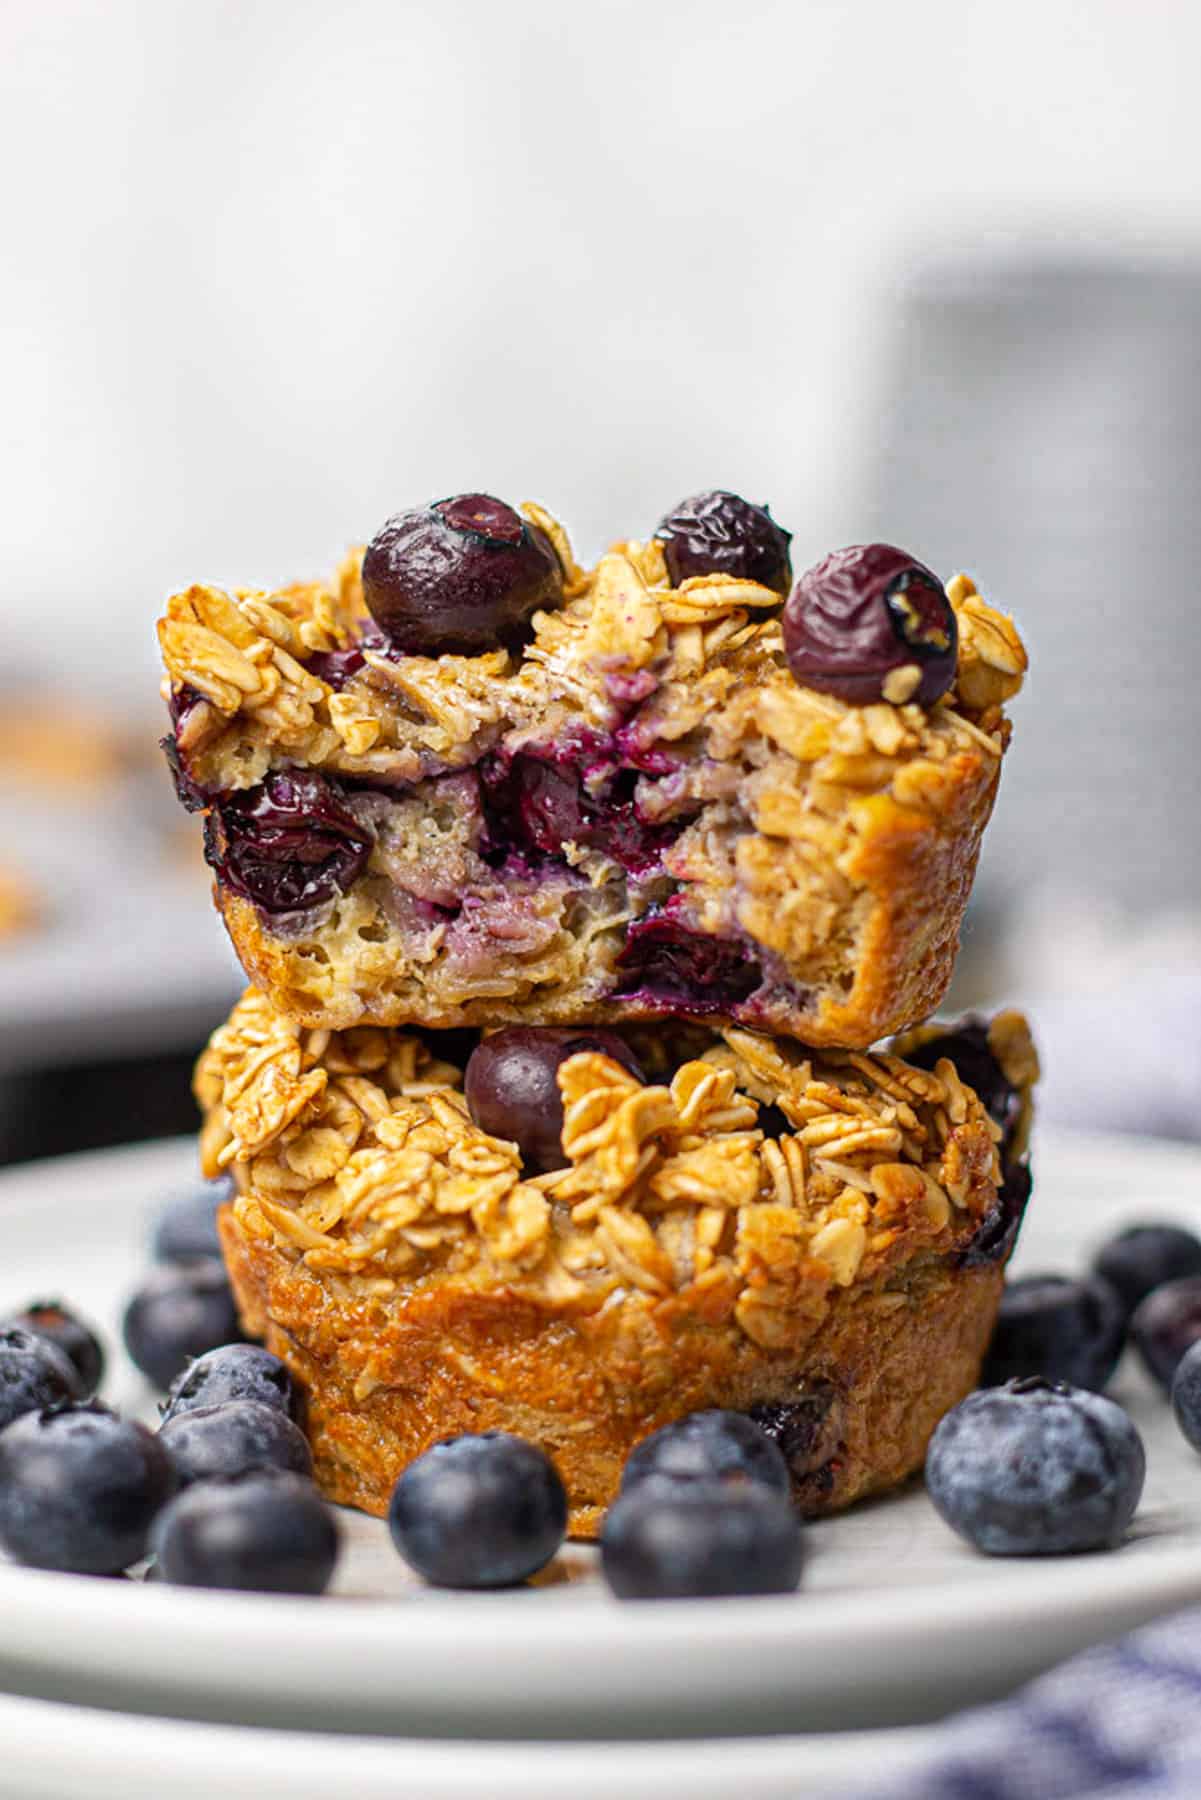 Blueberry Baked Oatmeal Cups on top of each other on a plate with blueberries around them.